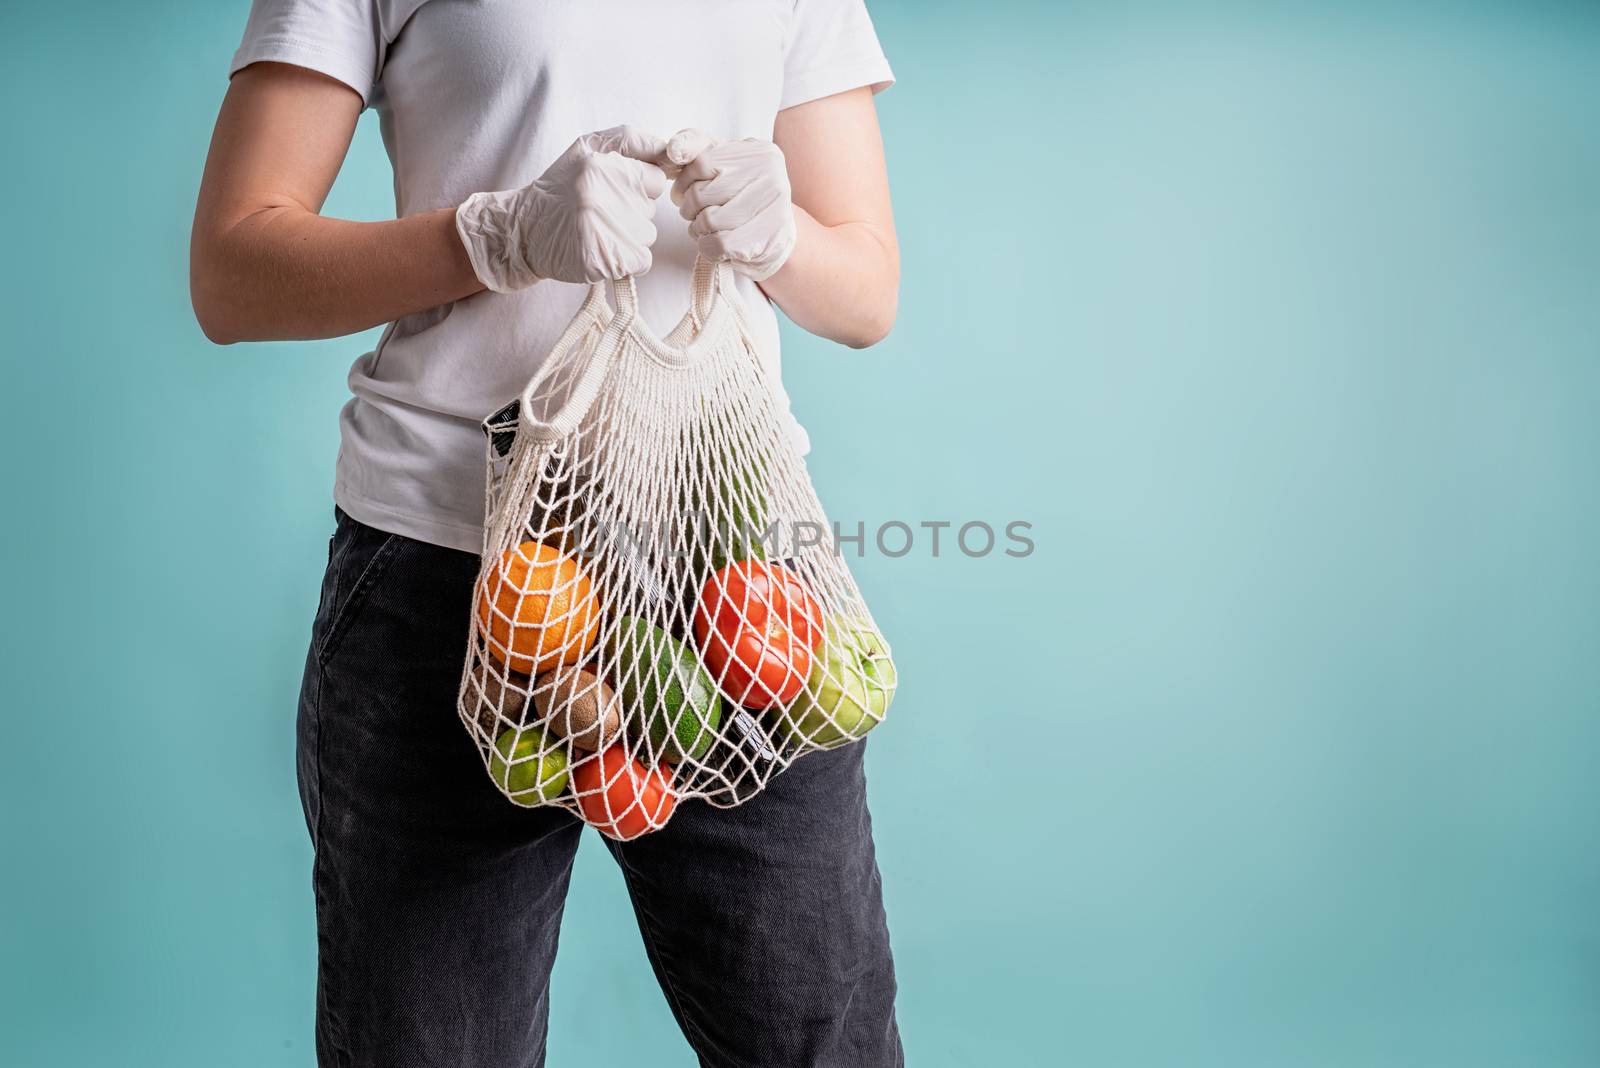 Zero waste concept. Coronavirus food delivery. Woman in gloves holding a white mesh bag with vegetables isolated on blue background with copy space